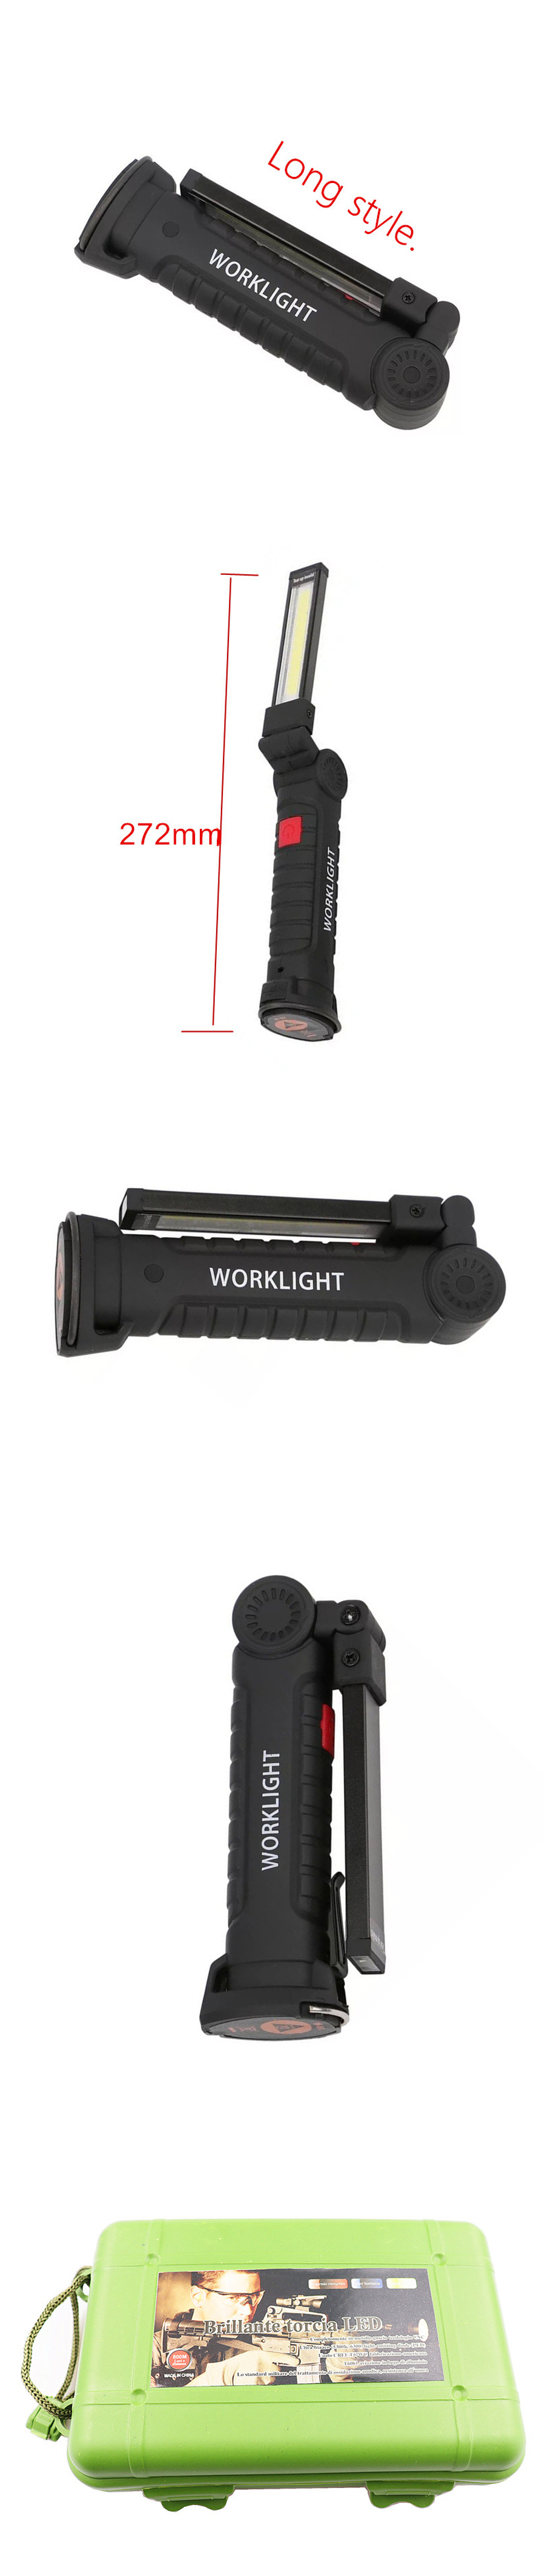 Built-in-18650-Battery-XANES-COB-LED-Multi-Function-Folding-Work-Light-Set-USB-Rechargeable-LED-Flas-1730181